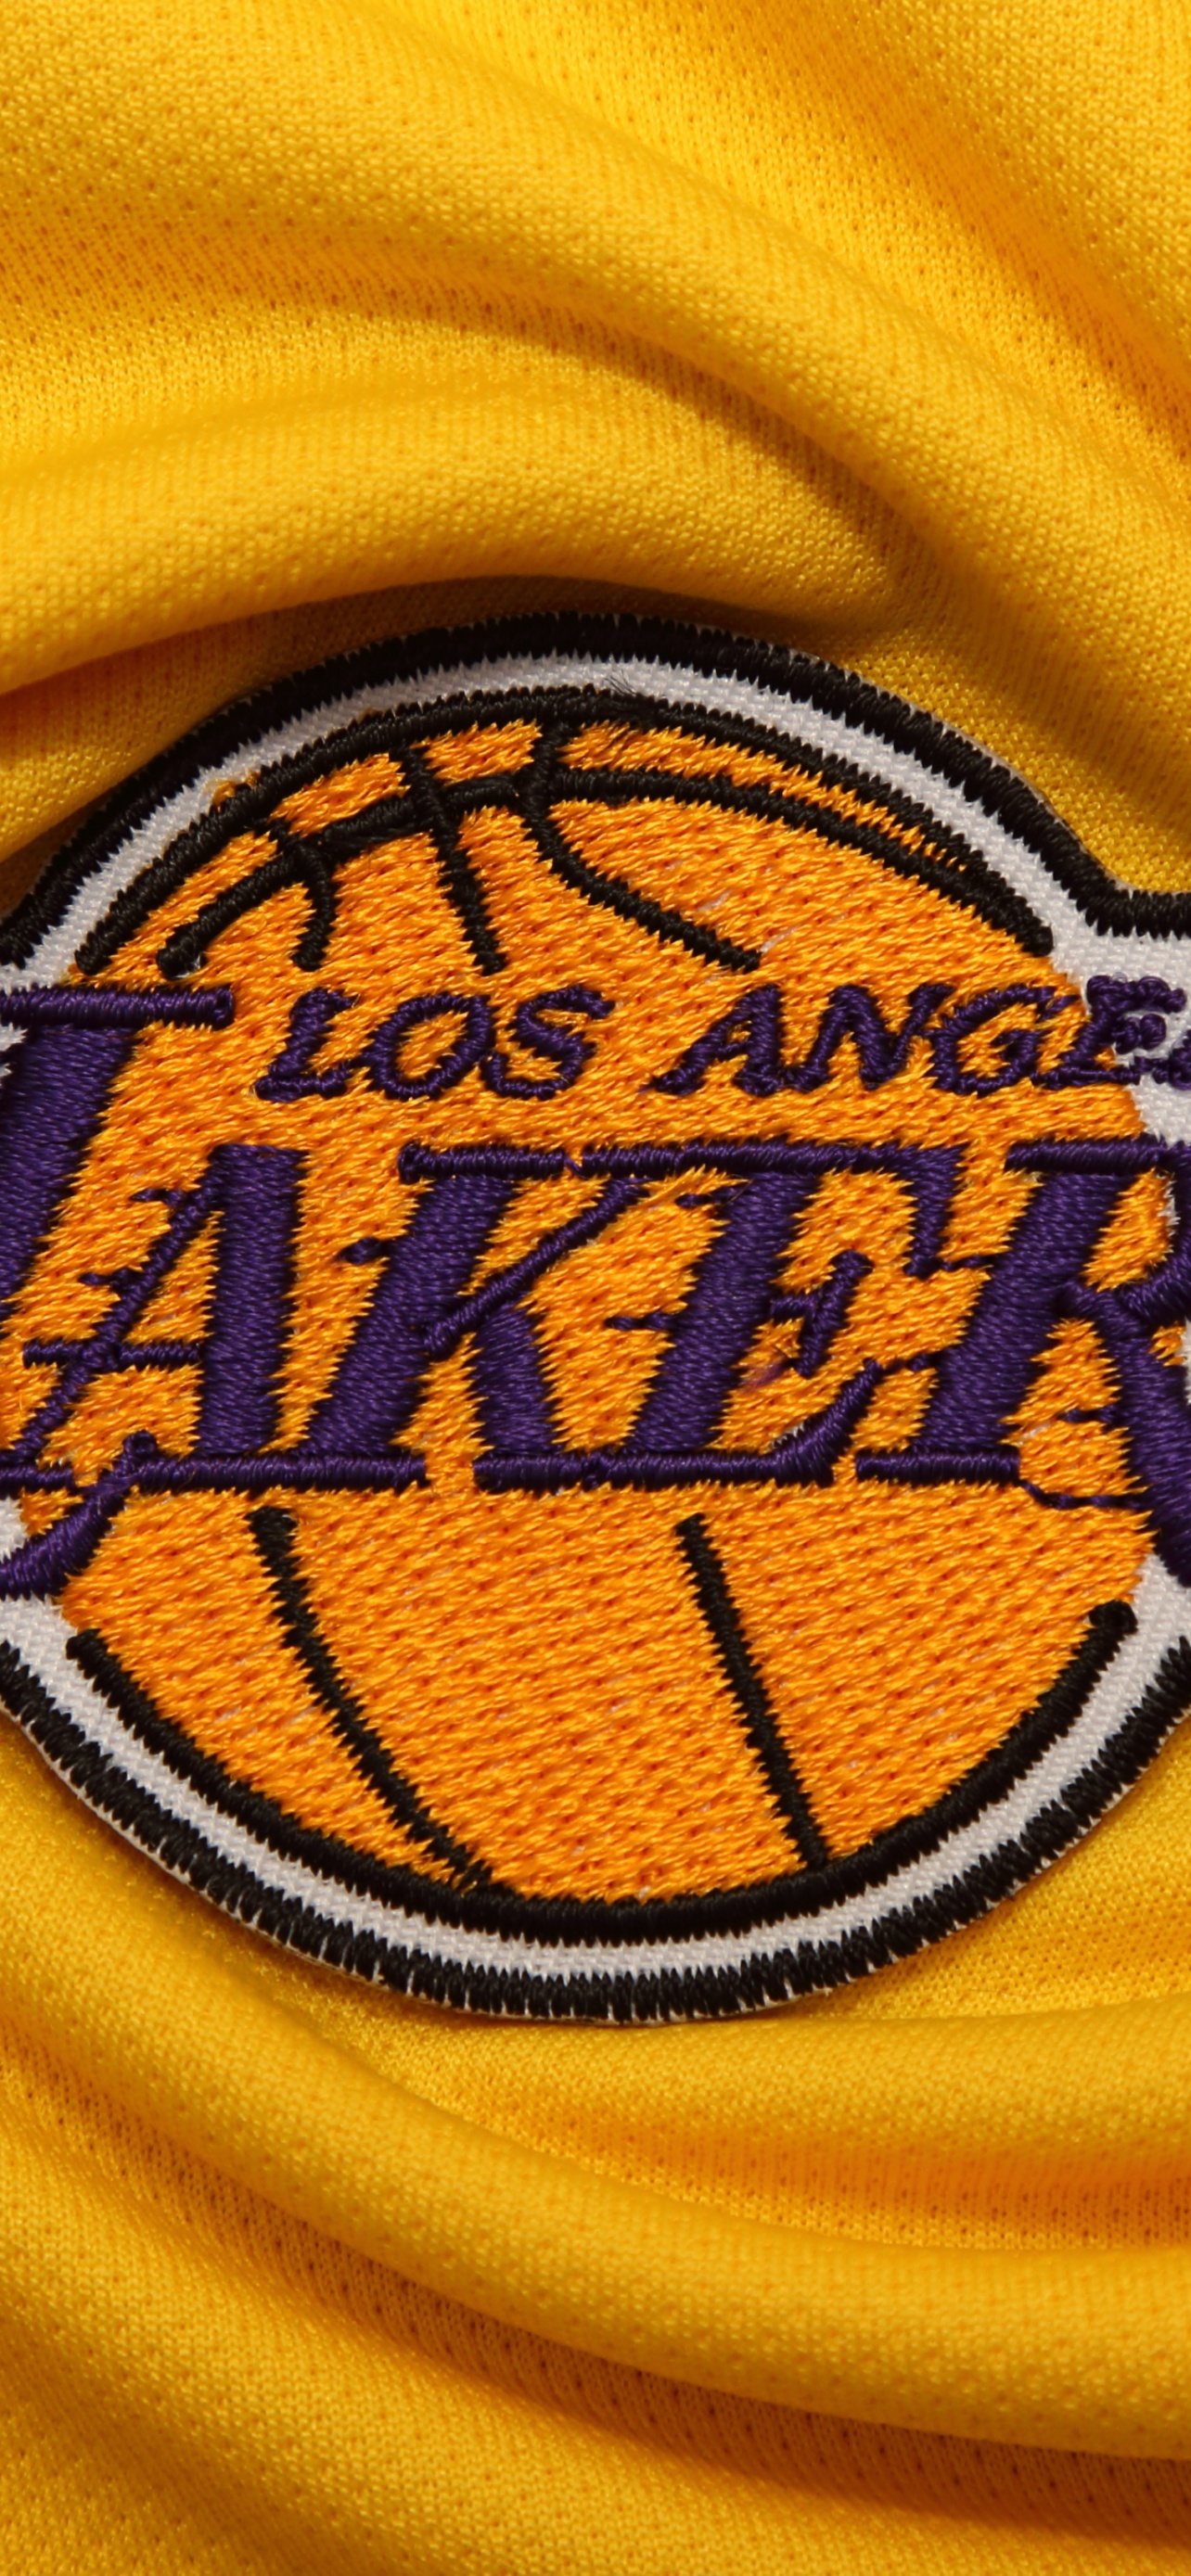 HoopsWallpapers.com – Get the latest HD and mobile NBA wallpapers today! LA  Lakers Archives - HoopsWallpapers.com - Get the latest HD and mobile NBA  wallpapers today!